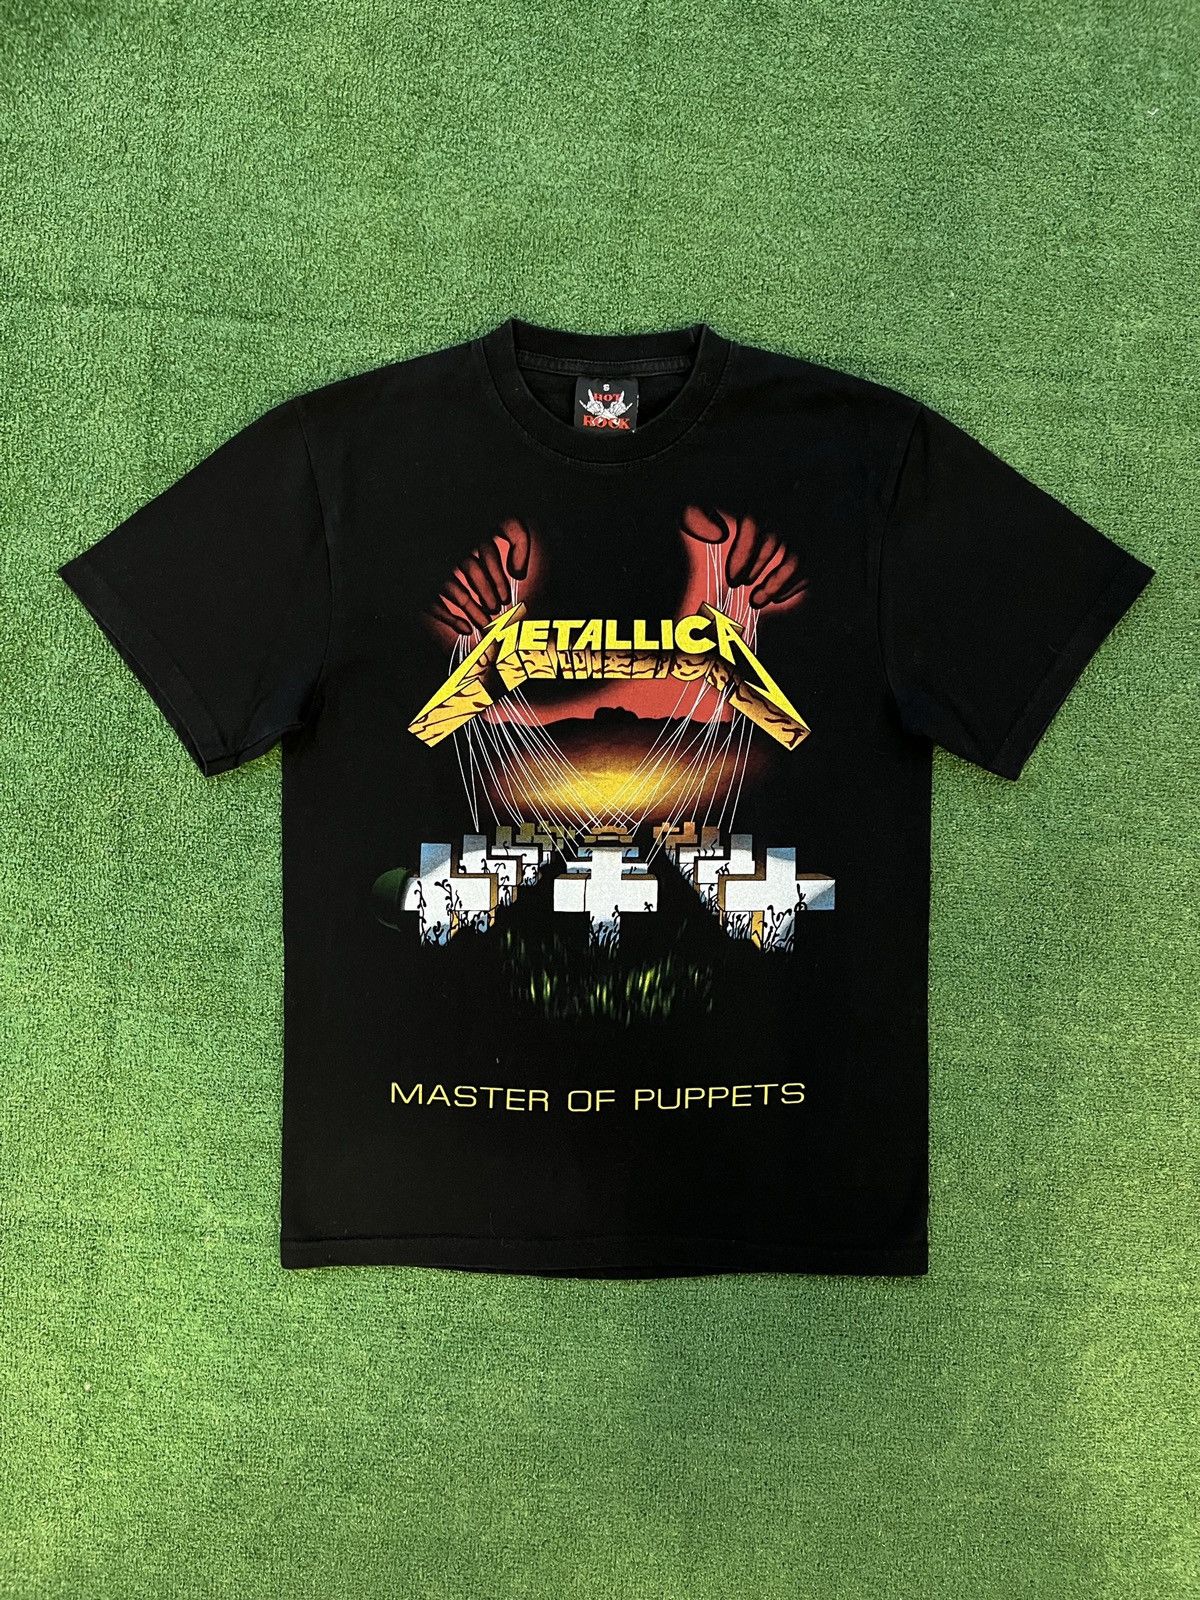 Pre-owned Band Tees X Rock T Shirt Vintage 00s Metallica Master Of Puppets Rock Band Black Tee (size Small)